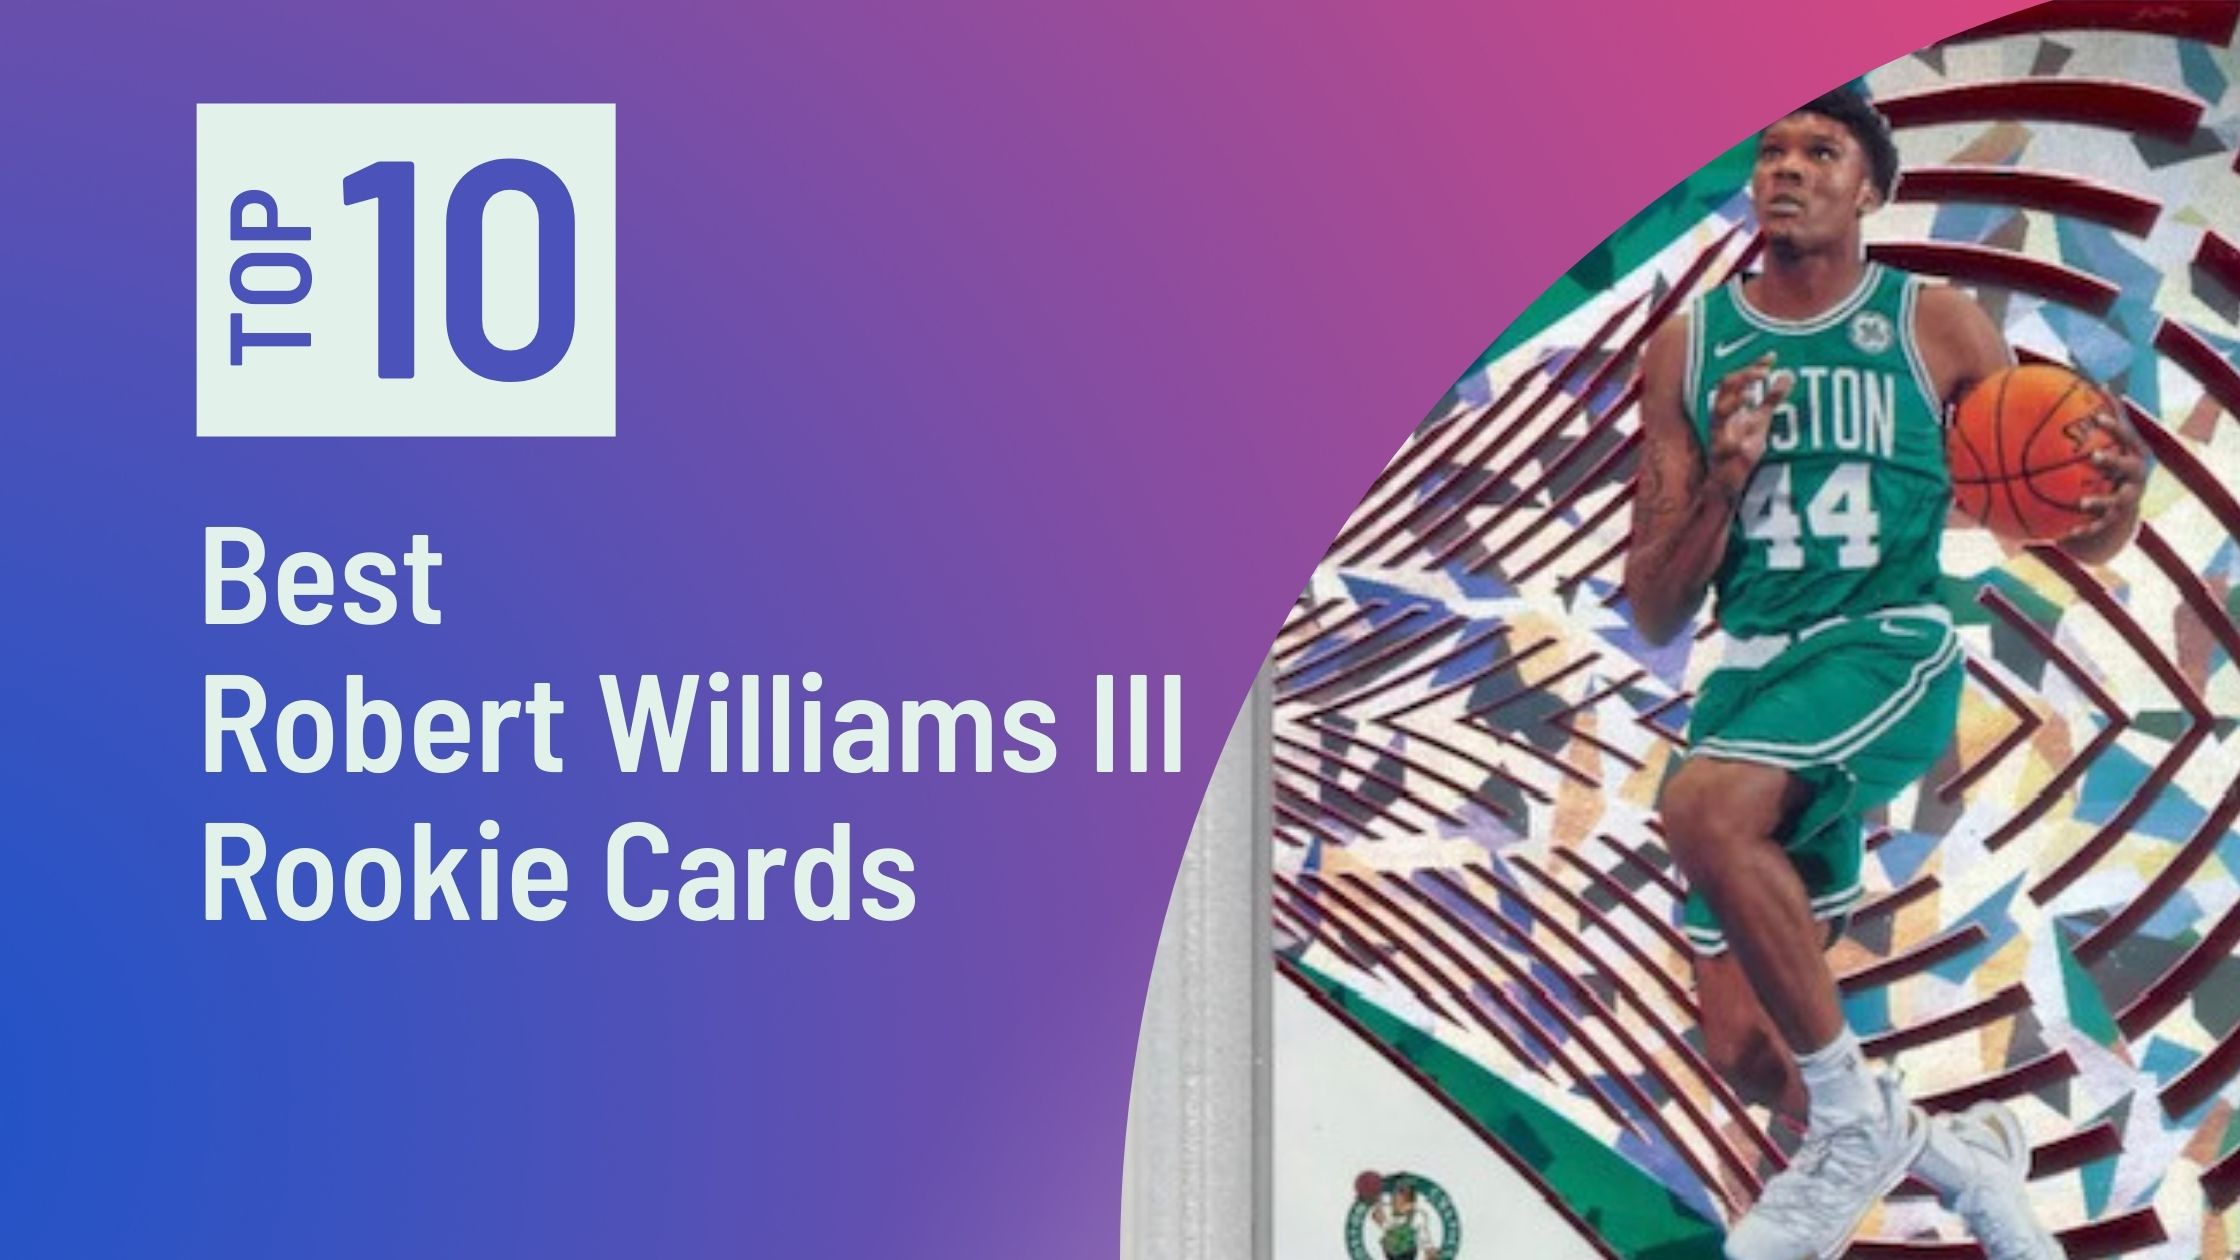 Featured Image for the Best Robert Williams III Rookie Cards blog post